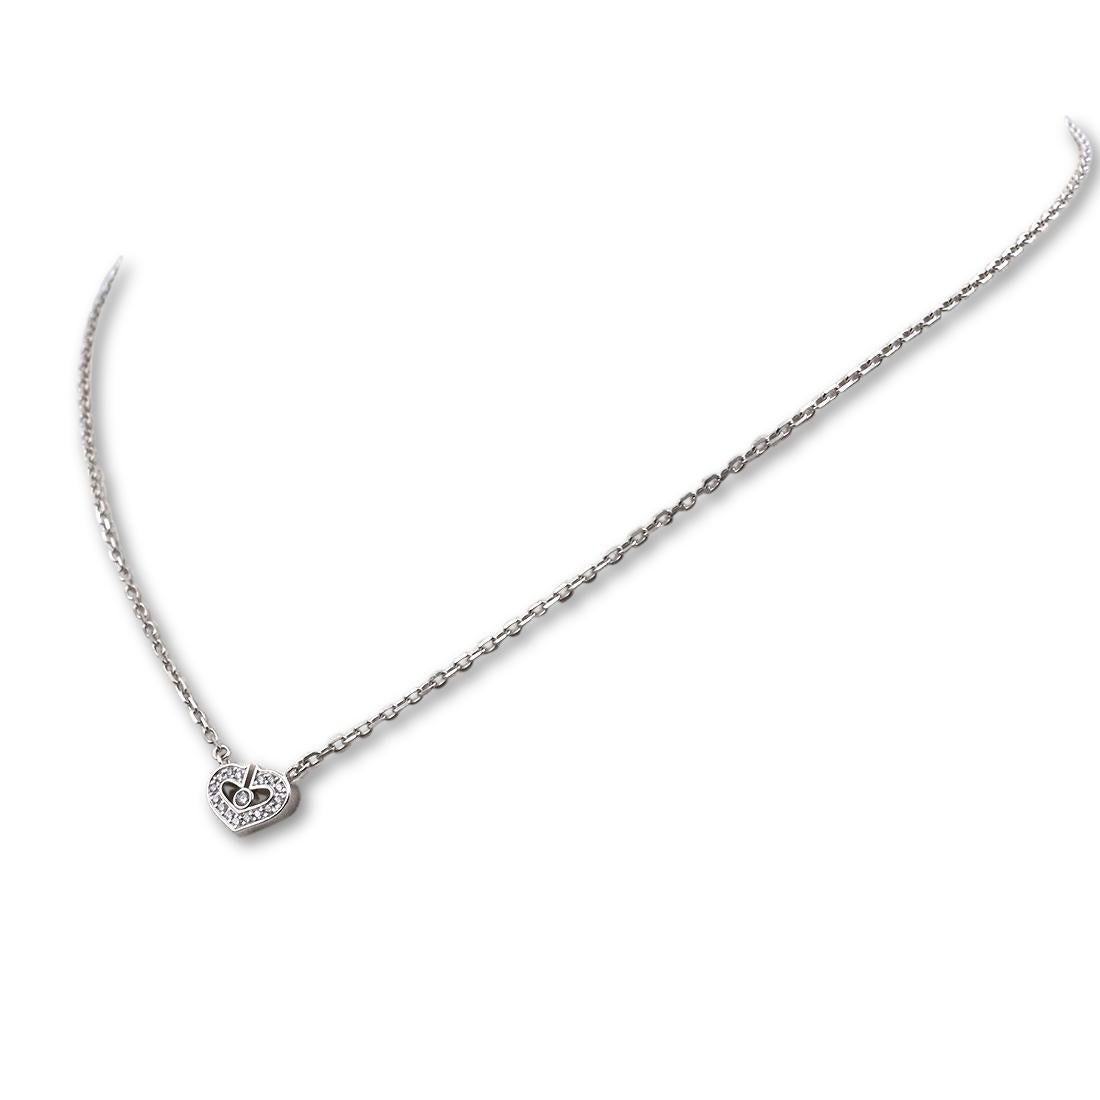 Authentic 'C de Cartier' necklace crafted in 18 karat white gold. The heart-shaped pendant, comprised of two Cartier 'C's, is set with approximately .07 carts of round brilliant diamonds. The pendant measures 10mm x 7.2mm and hangs from a 15.5 inch